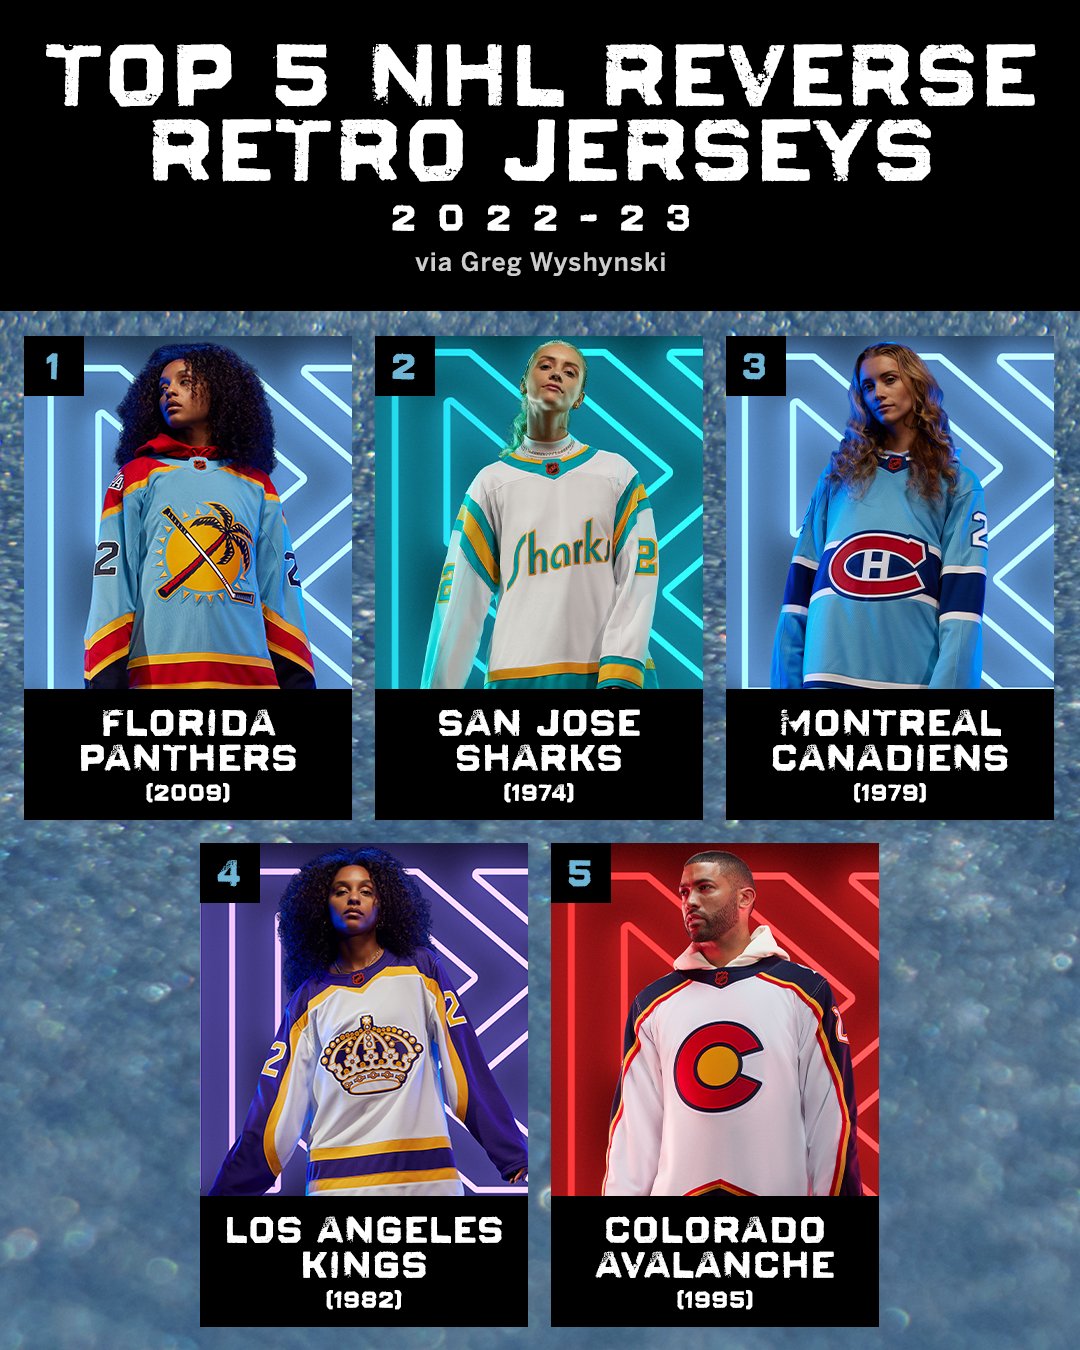 Ranking The Best AND Worst NHL Reverse Retro Jerseys